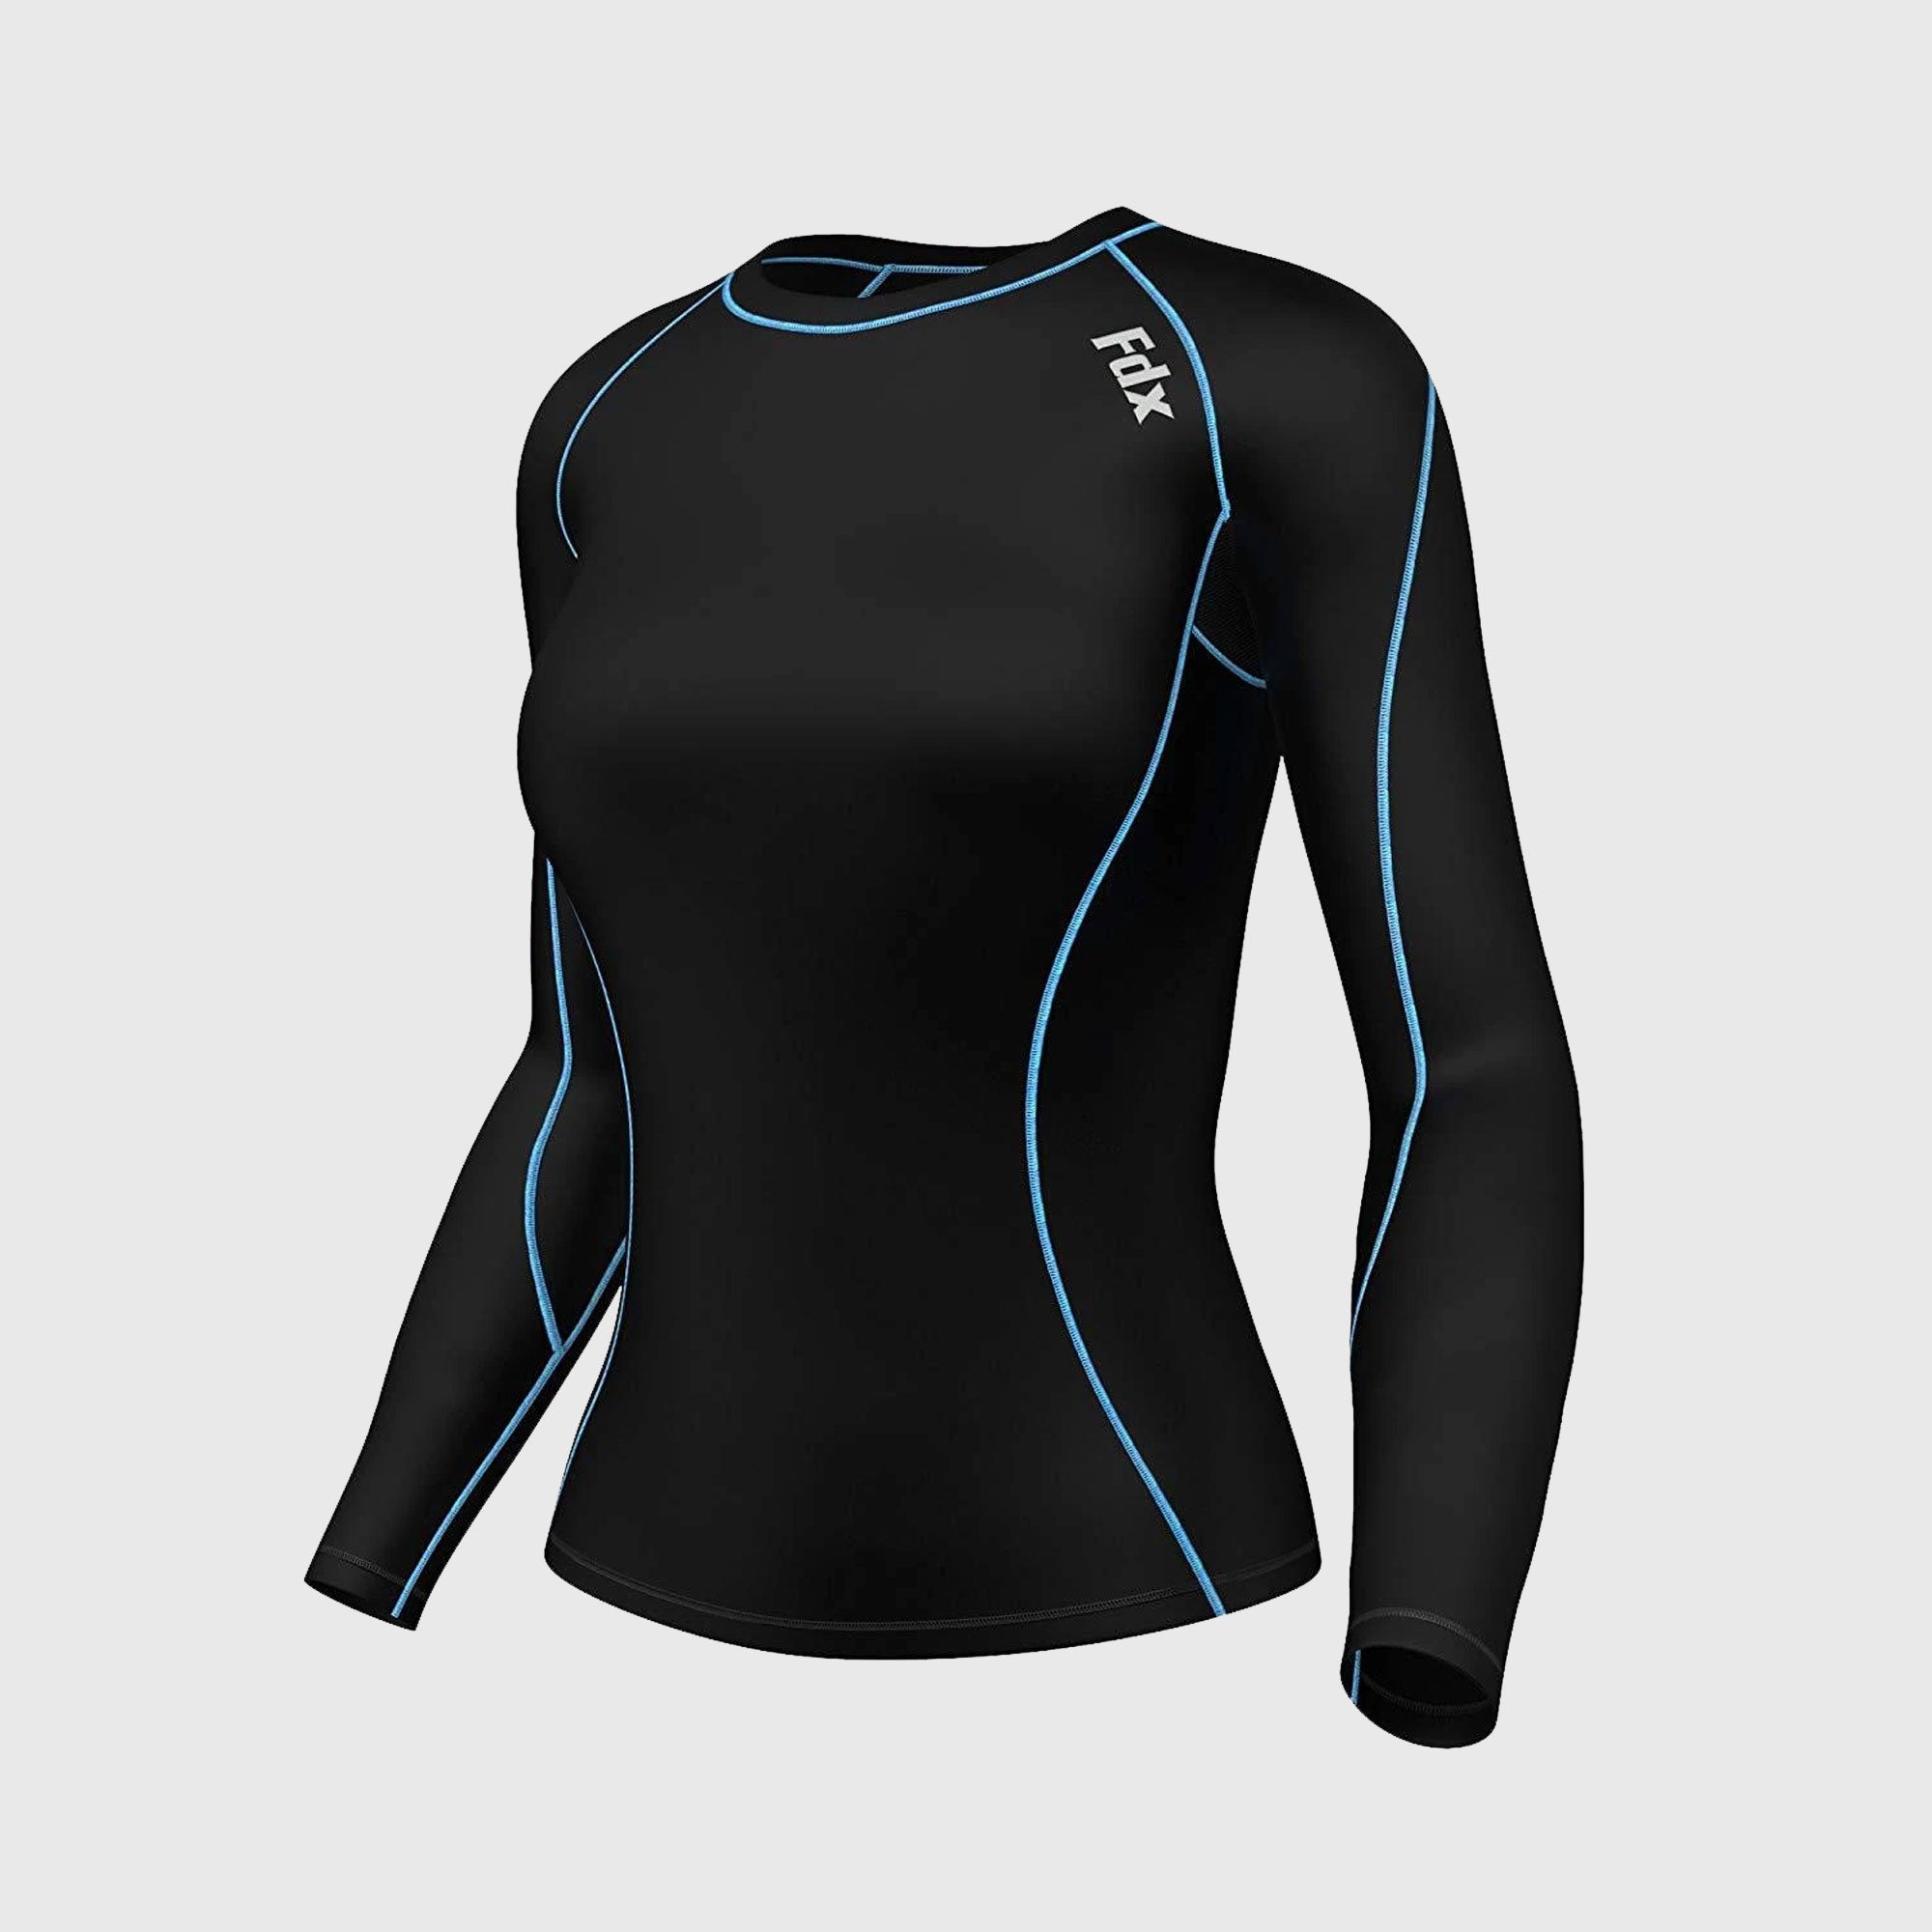 Fdx Women's Long Sleeve Color Ultralight Compression Top Running Gym Workout Wear Rash Guard Stretchable Quick Dry Breathable All Sports outdoor- Monarch